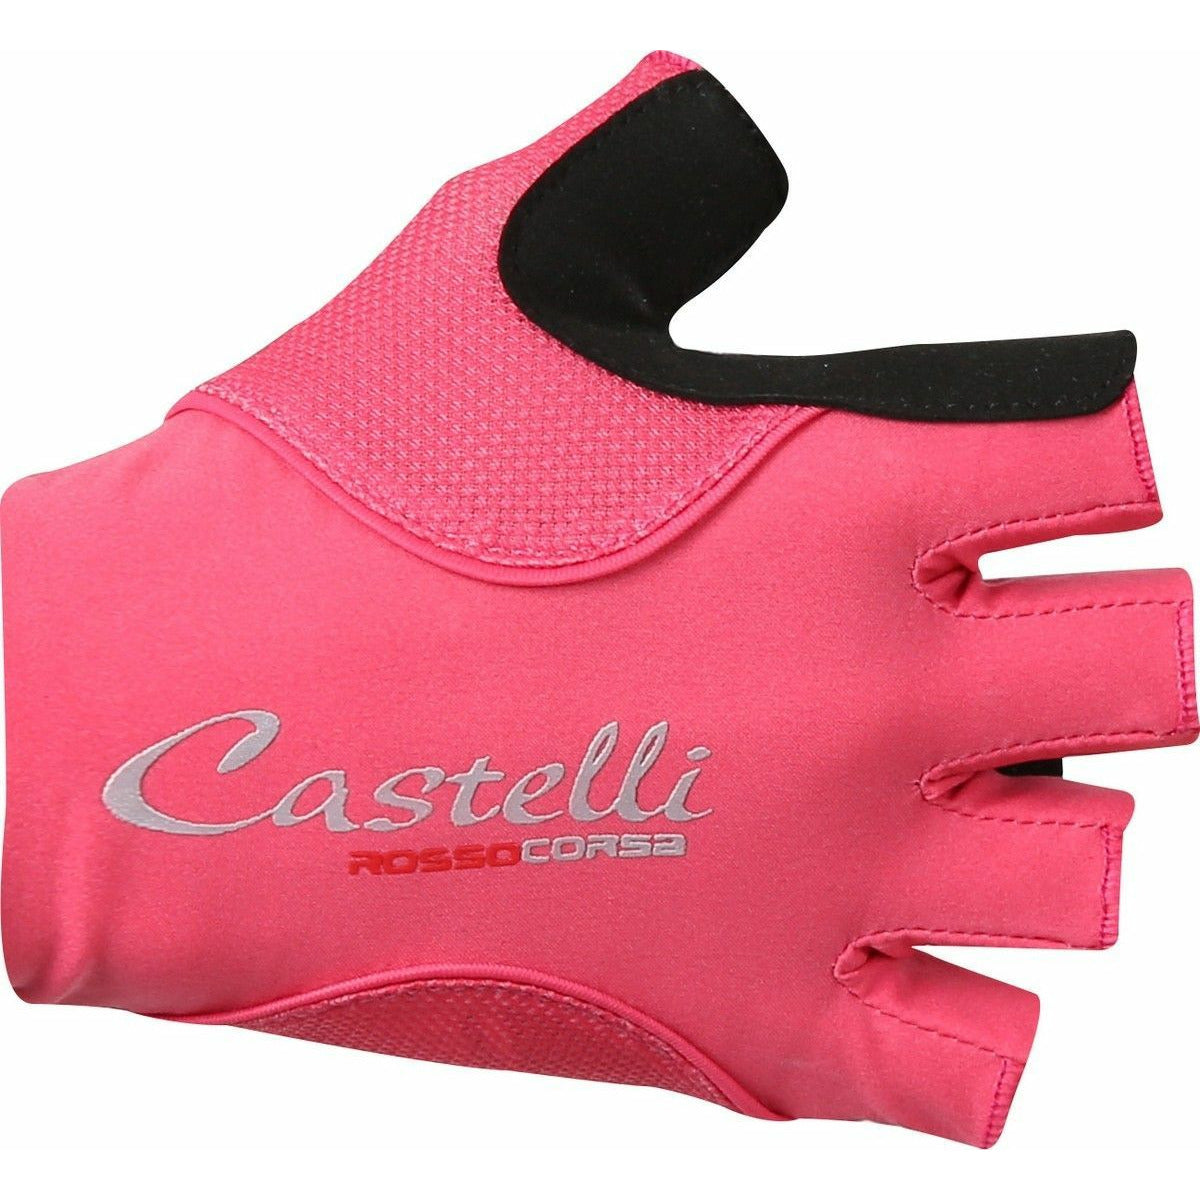 Castelli Women's Rosso Corsa Pave Cycling Gloves